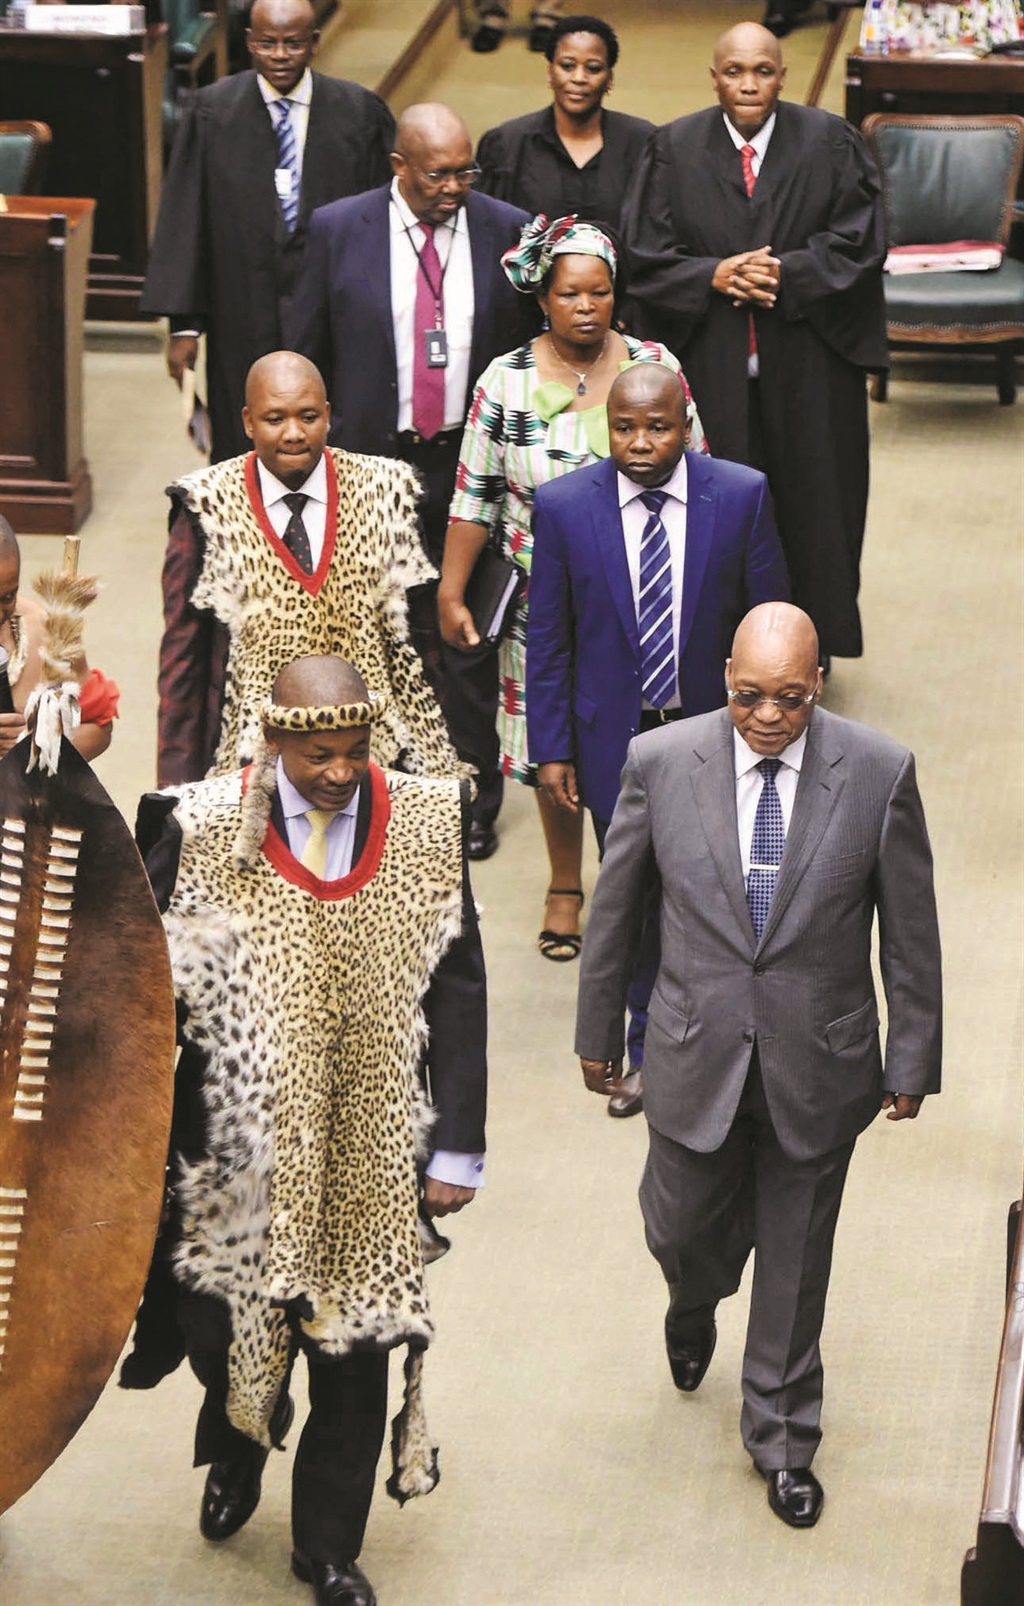 CHIEFLY SPEAKING National House of Traditional Leaders chairman Kgosi Phopolo Pontsho Maubane (left) and President Jacob Zuma at the Old Assembly Chamber.  Picture: Siyabulela Duda 